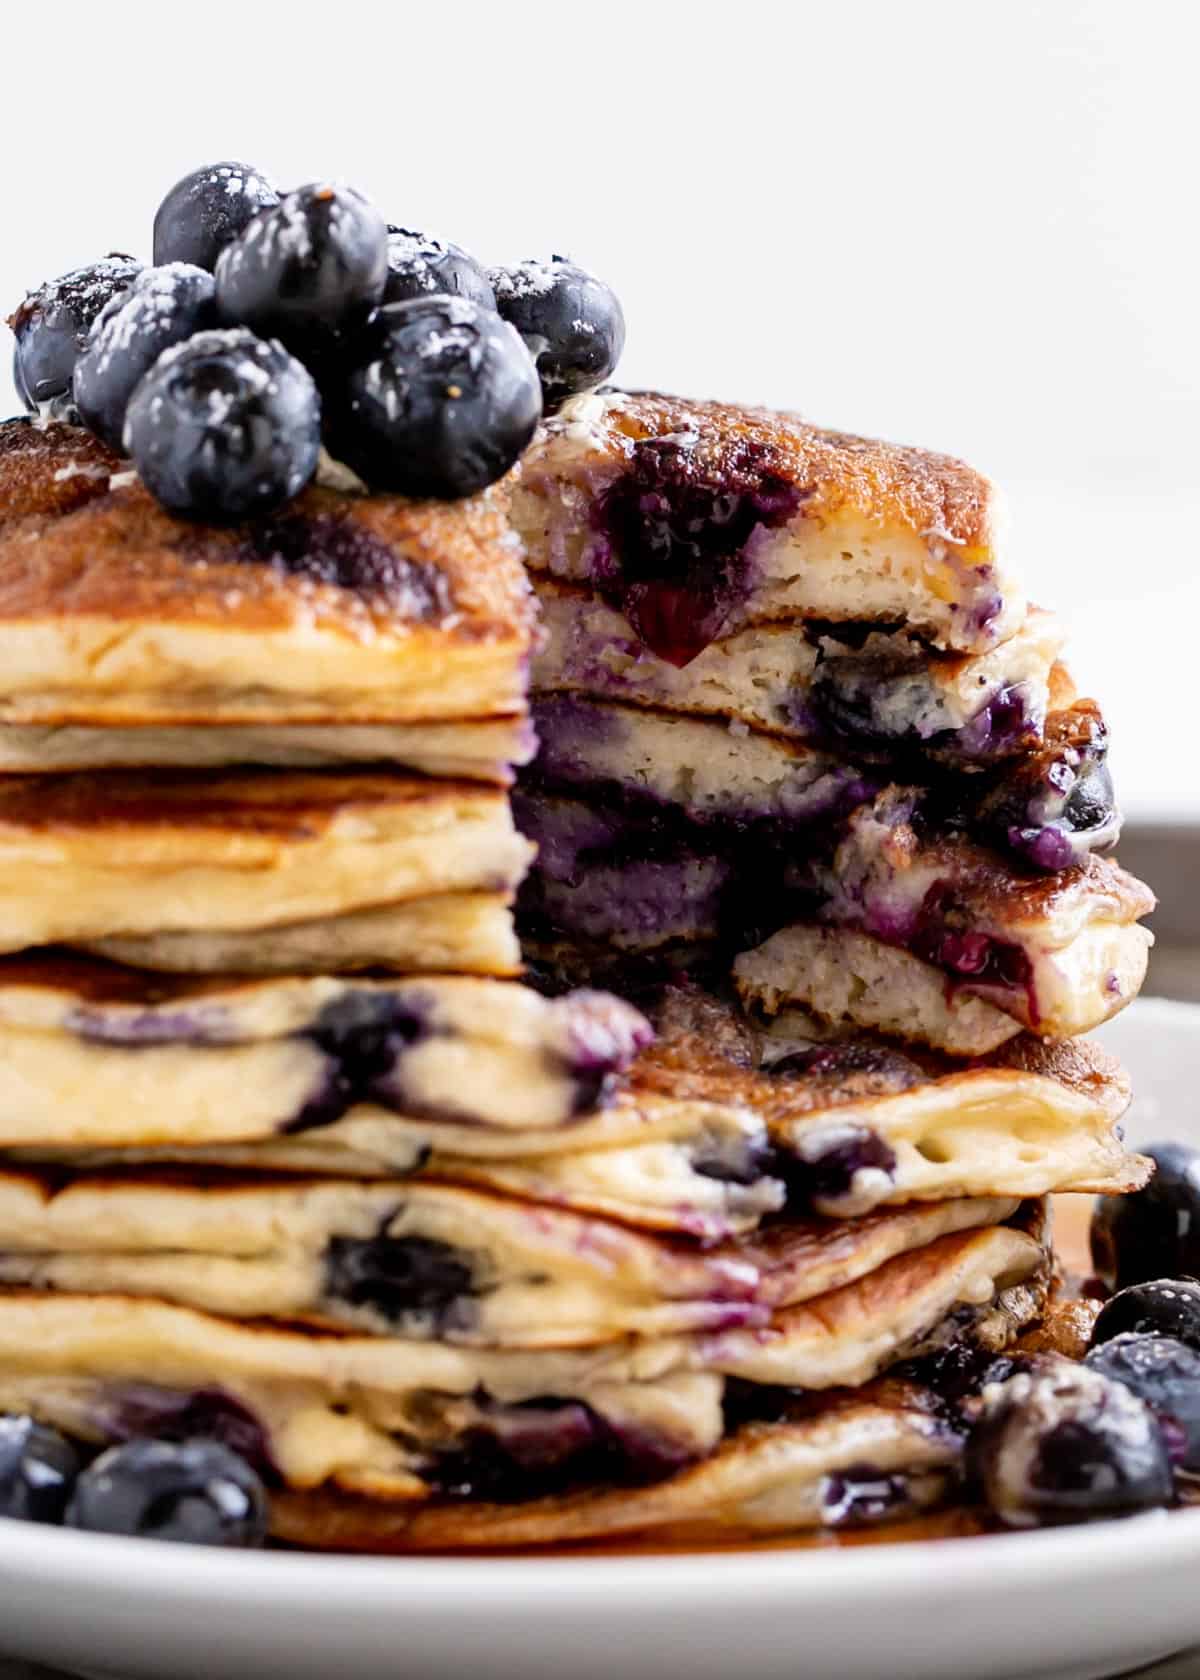 Cutting into a stack of Blueberry Ricotta Pancakes on a plate with maple syrup. Topped with fresh blueberries | cafedelites.com